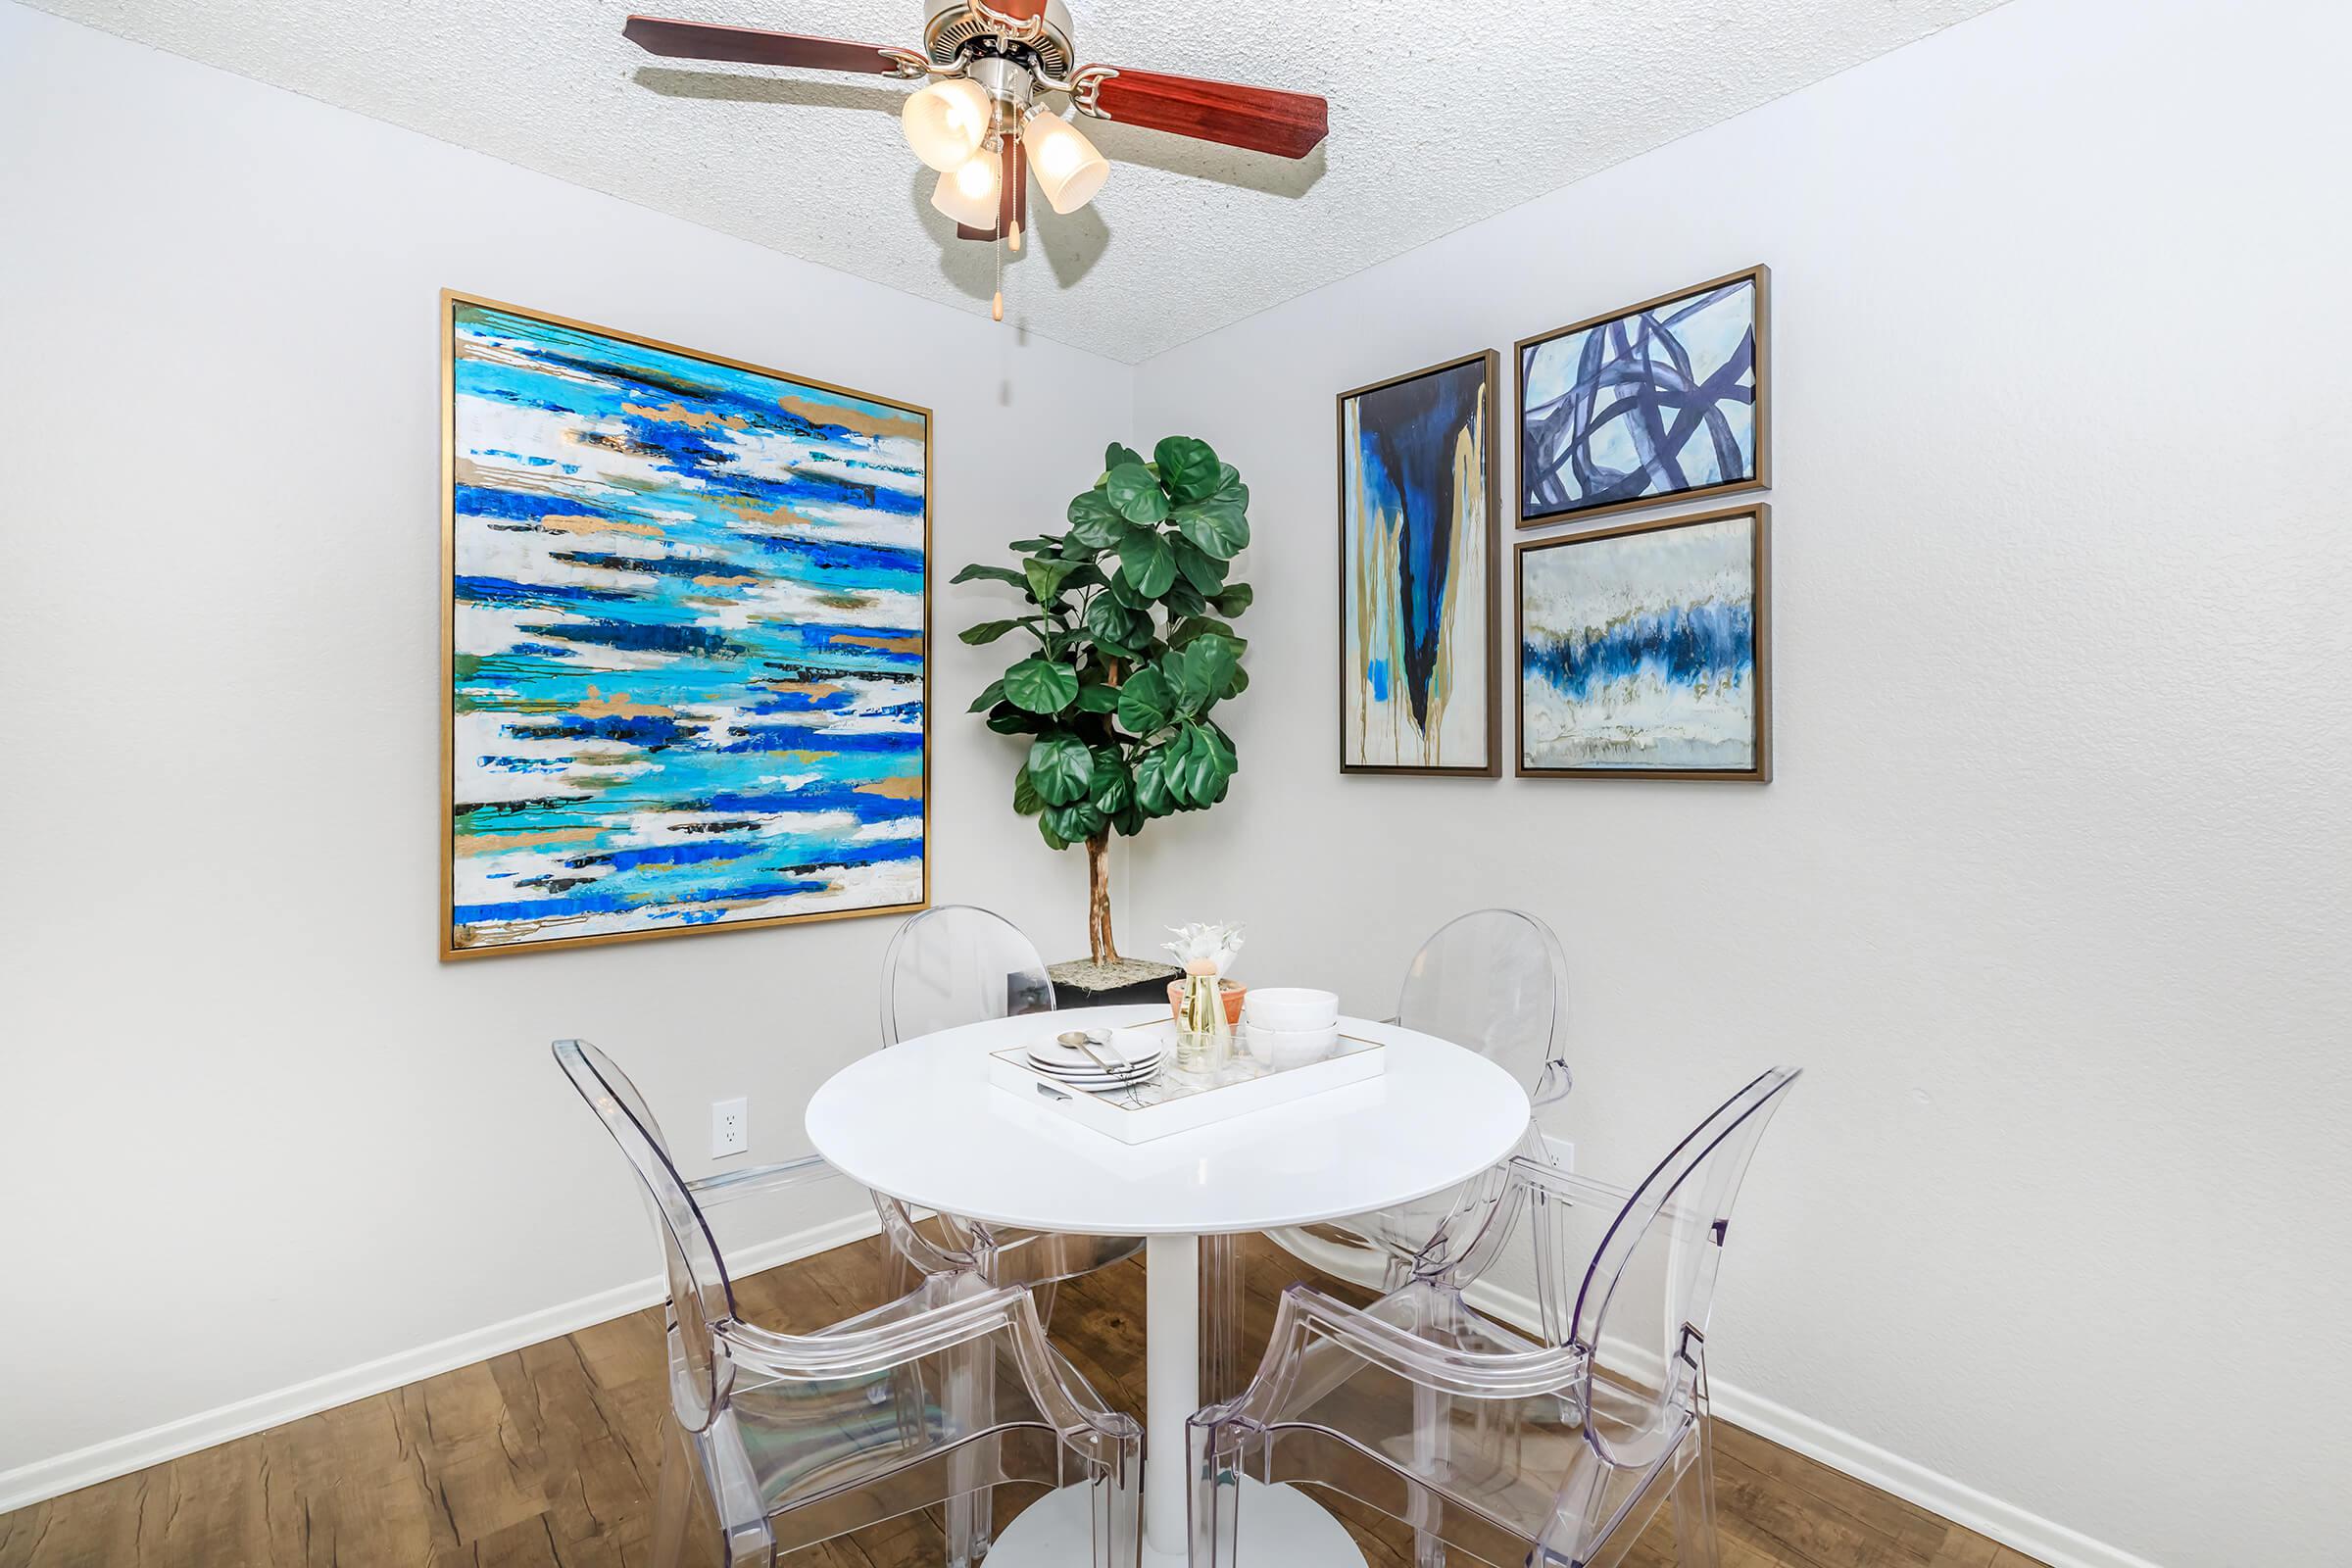 Furnished dining room with artwork